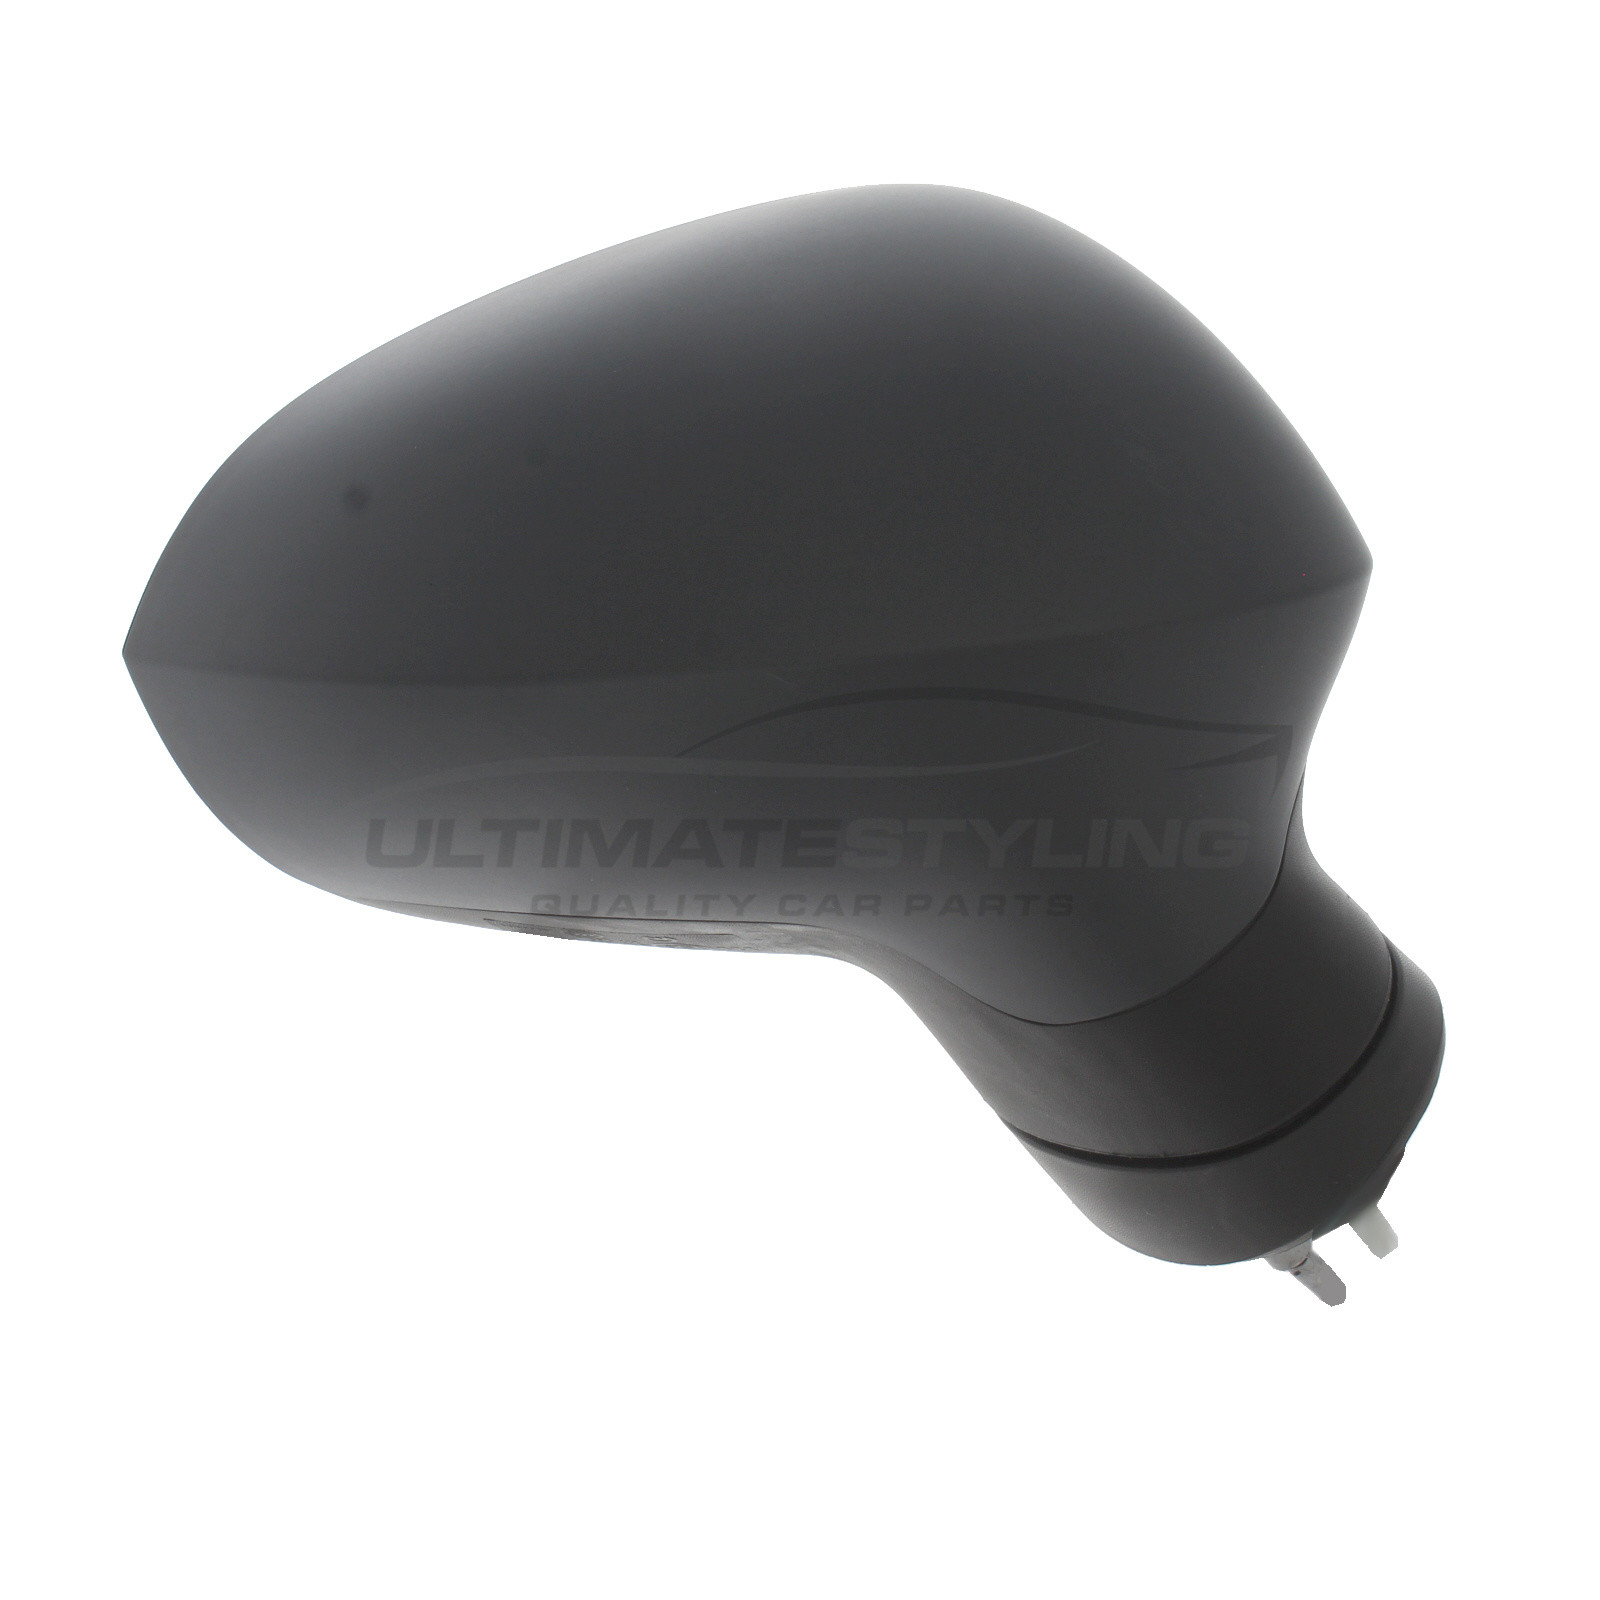 Seat Leon Wing Mirror / Door Mirror - Drivers Side (RH) - Electric adjustment - Heated Glass - Power Folding - Paintable - Black